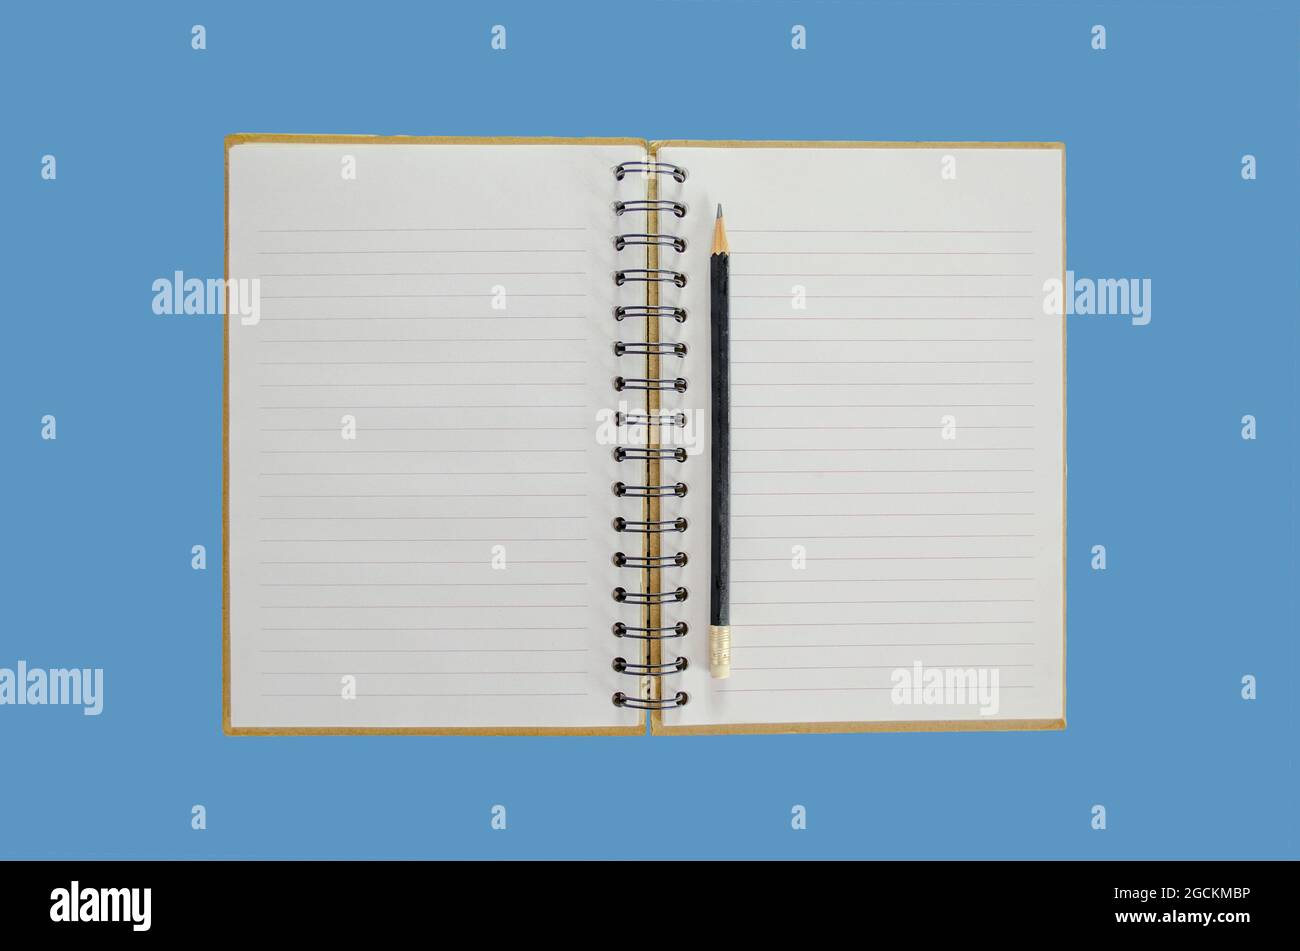 Opened notebook with a pencil on it with a blue background Stock Photo